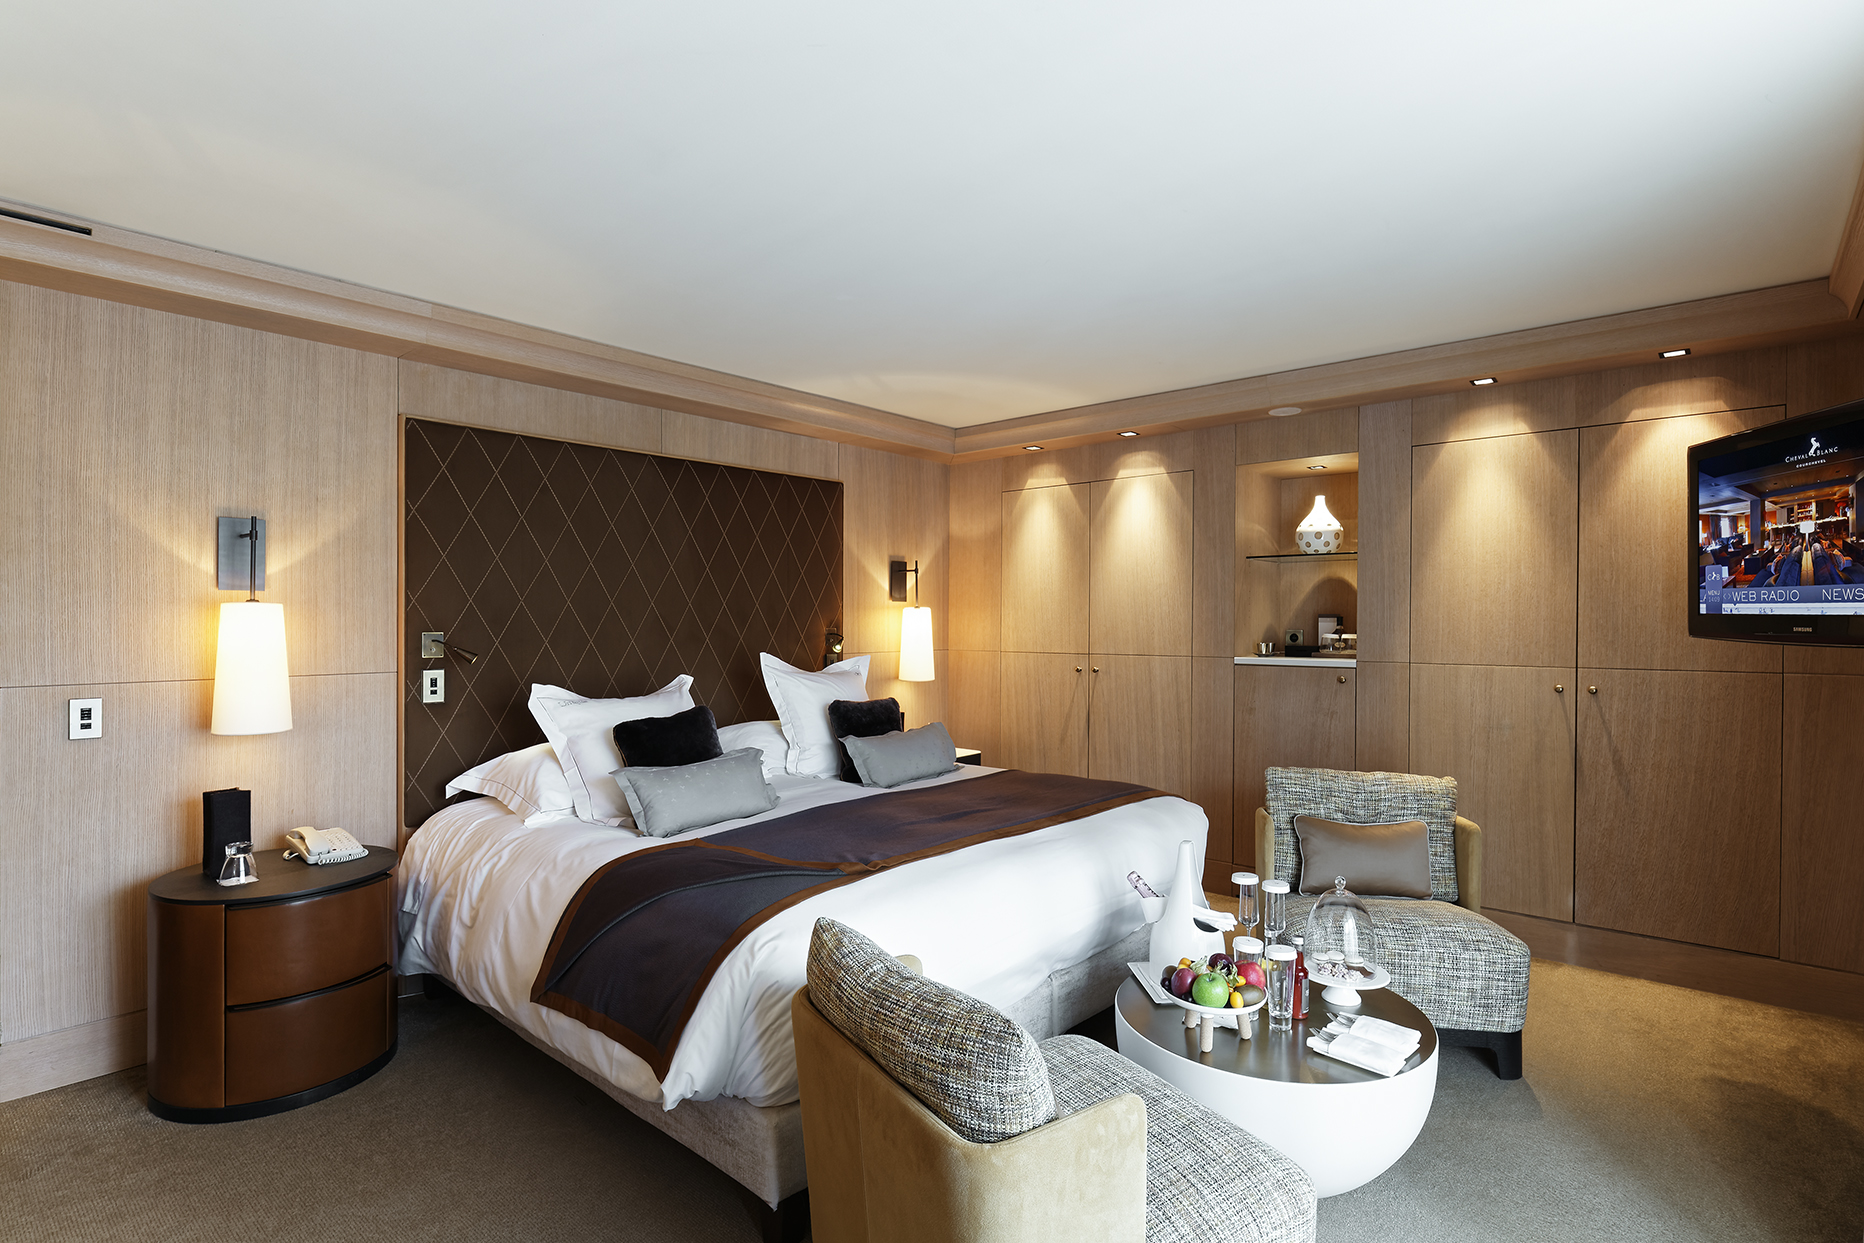 New Rooms at Cheval Blanc in Courchevel